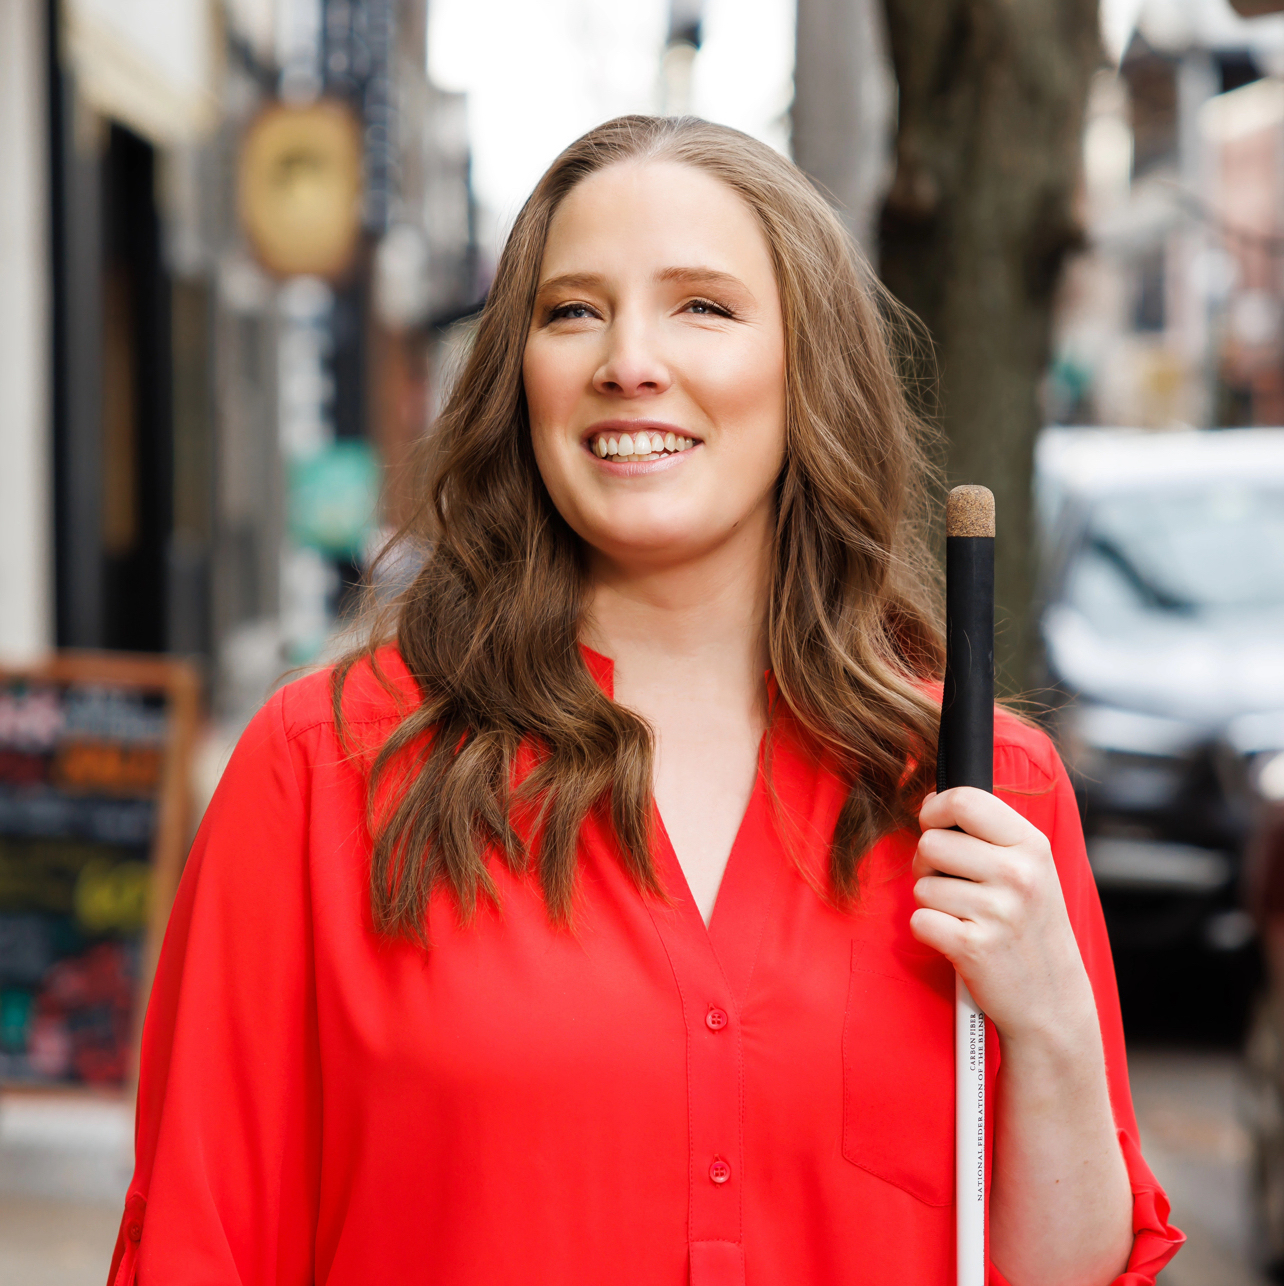 A portrait of Cynthia smiling slightly at three-quarters view and gazing upwards. She is seen from the elbows up, wearing a bright crimson blouse and holding her white cane. Behind her are hints of a bustling Pittsburgh, PA street.